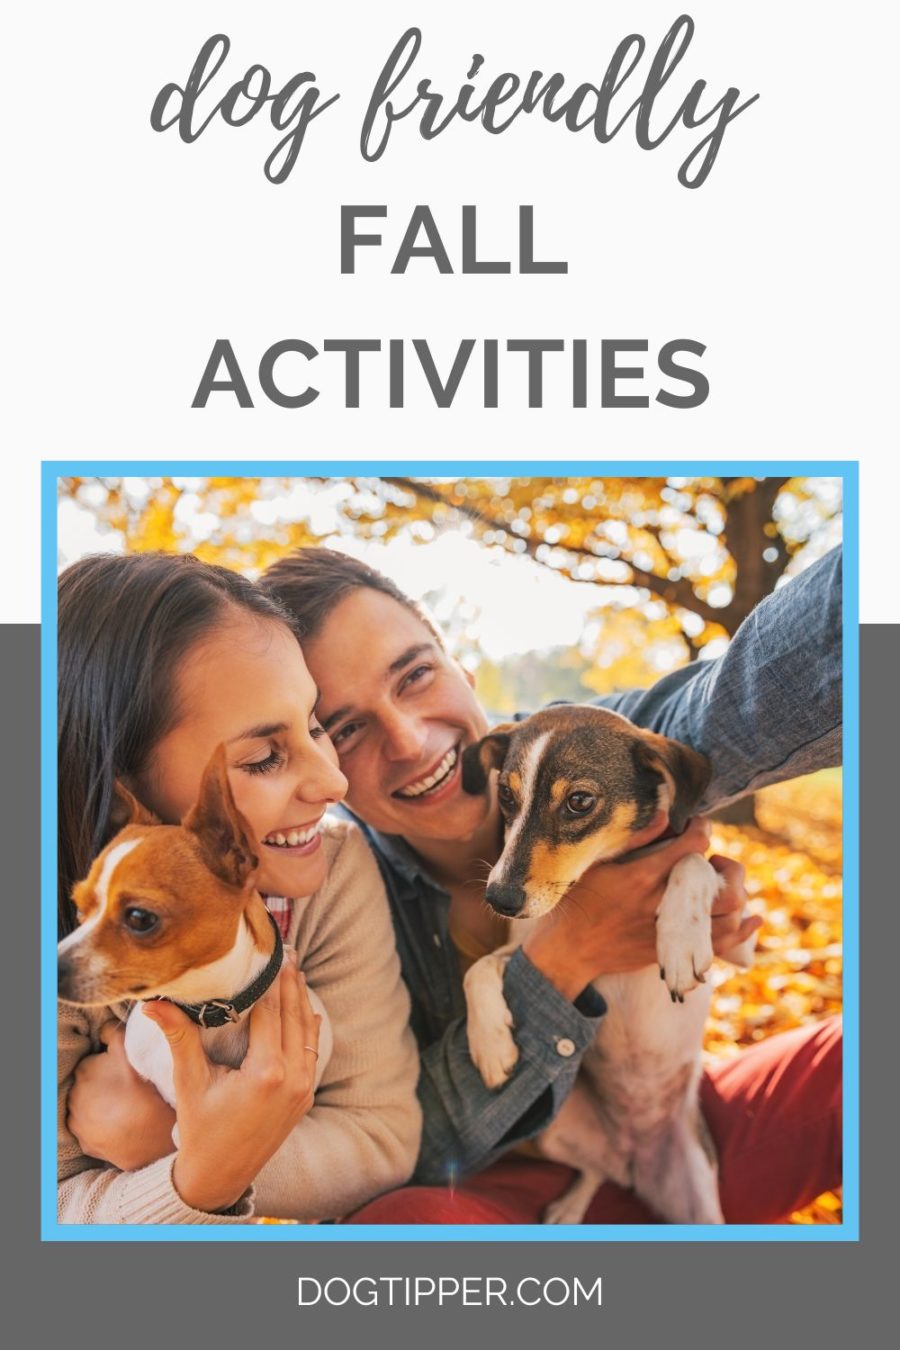 Top Dog-Friendly Fall Activities